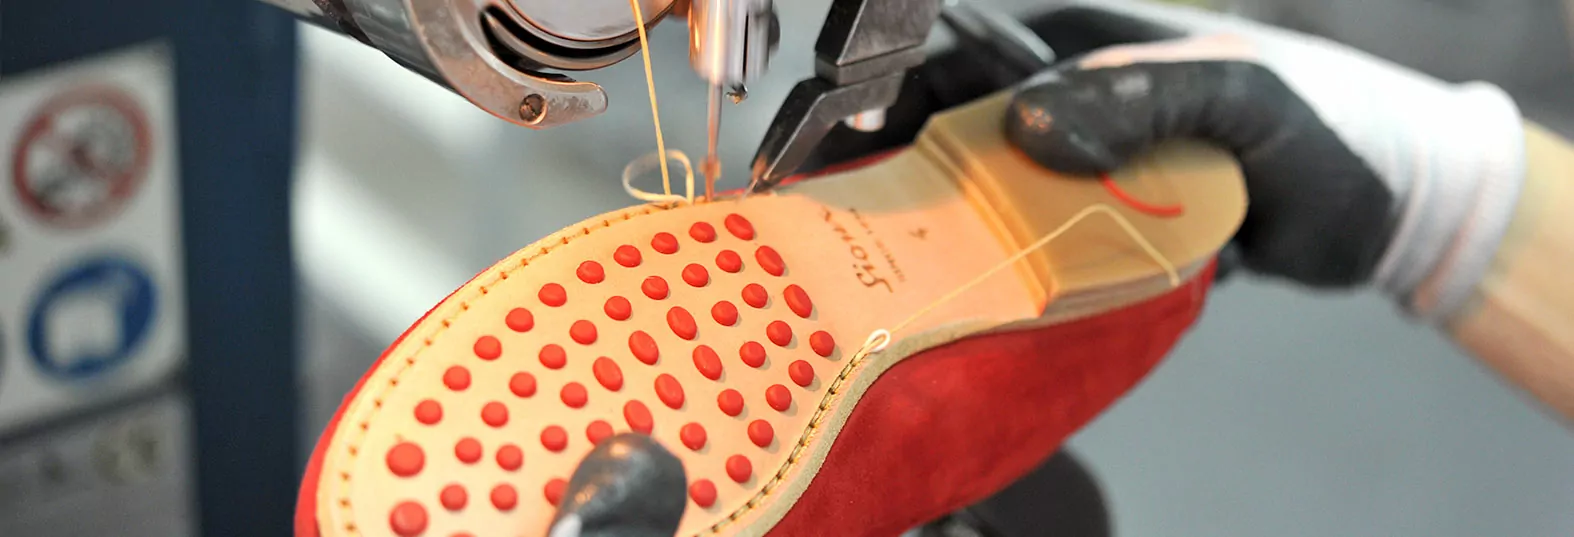 Shoemaking 150 Manufacturing Steps To Make The Perfect Shoe Shoemaking At Sioux